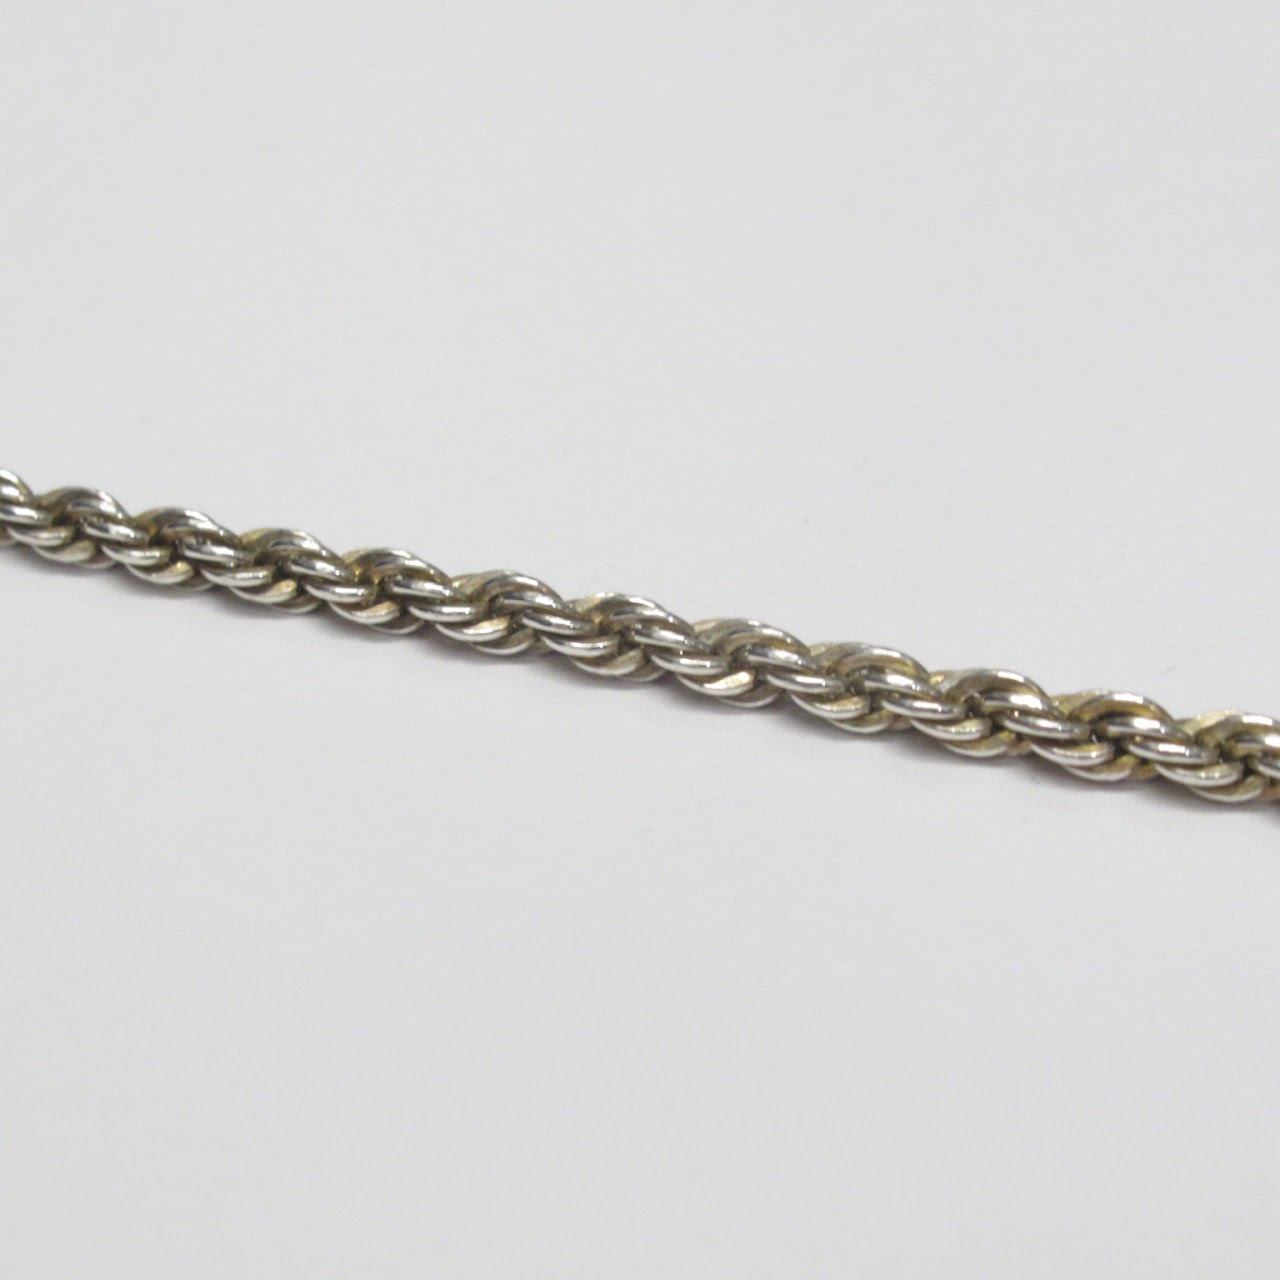 Tiffany & Co. Sterling Silver Twisted Chain Necklace